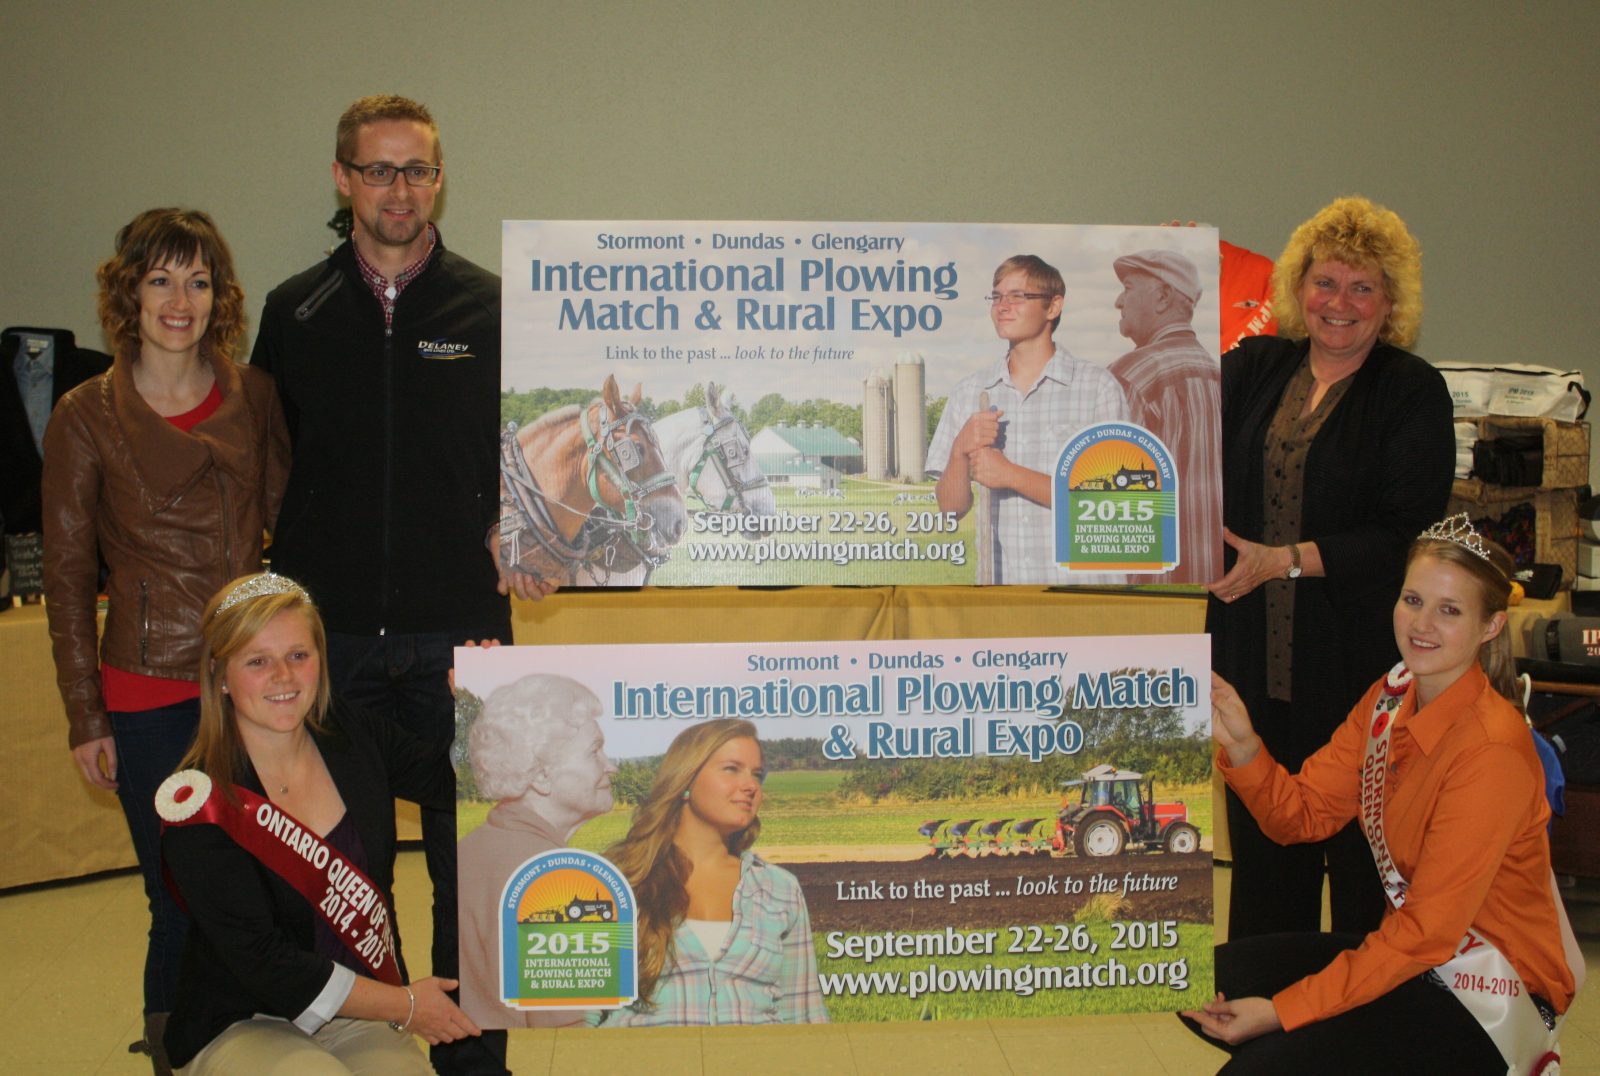 Plowing match agreement signed for 2015 event